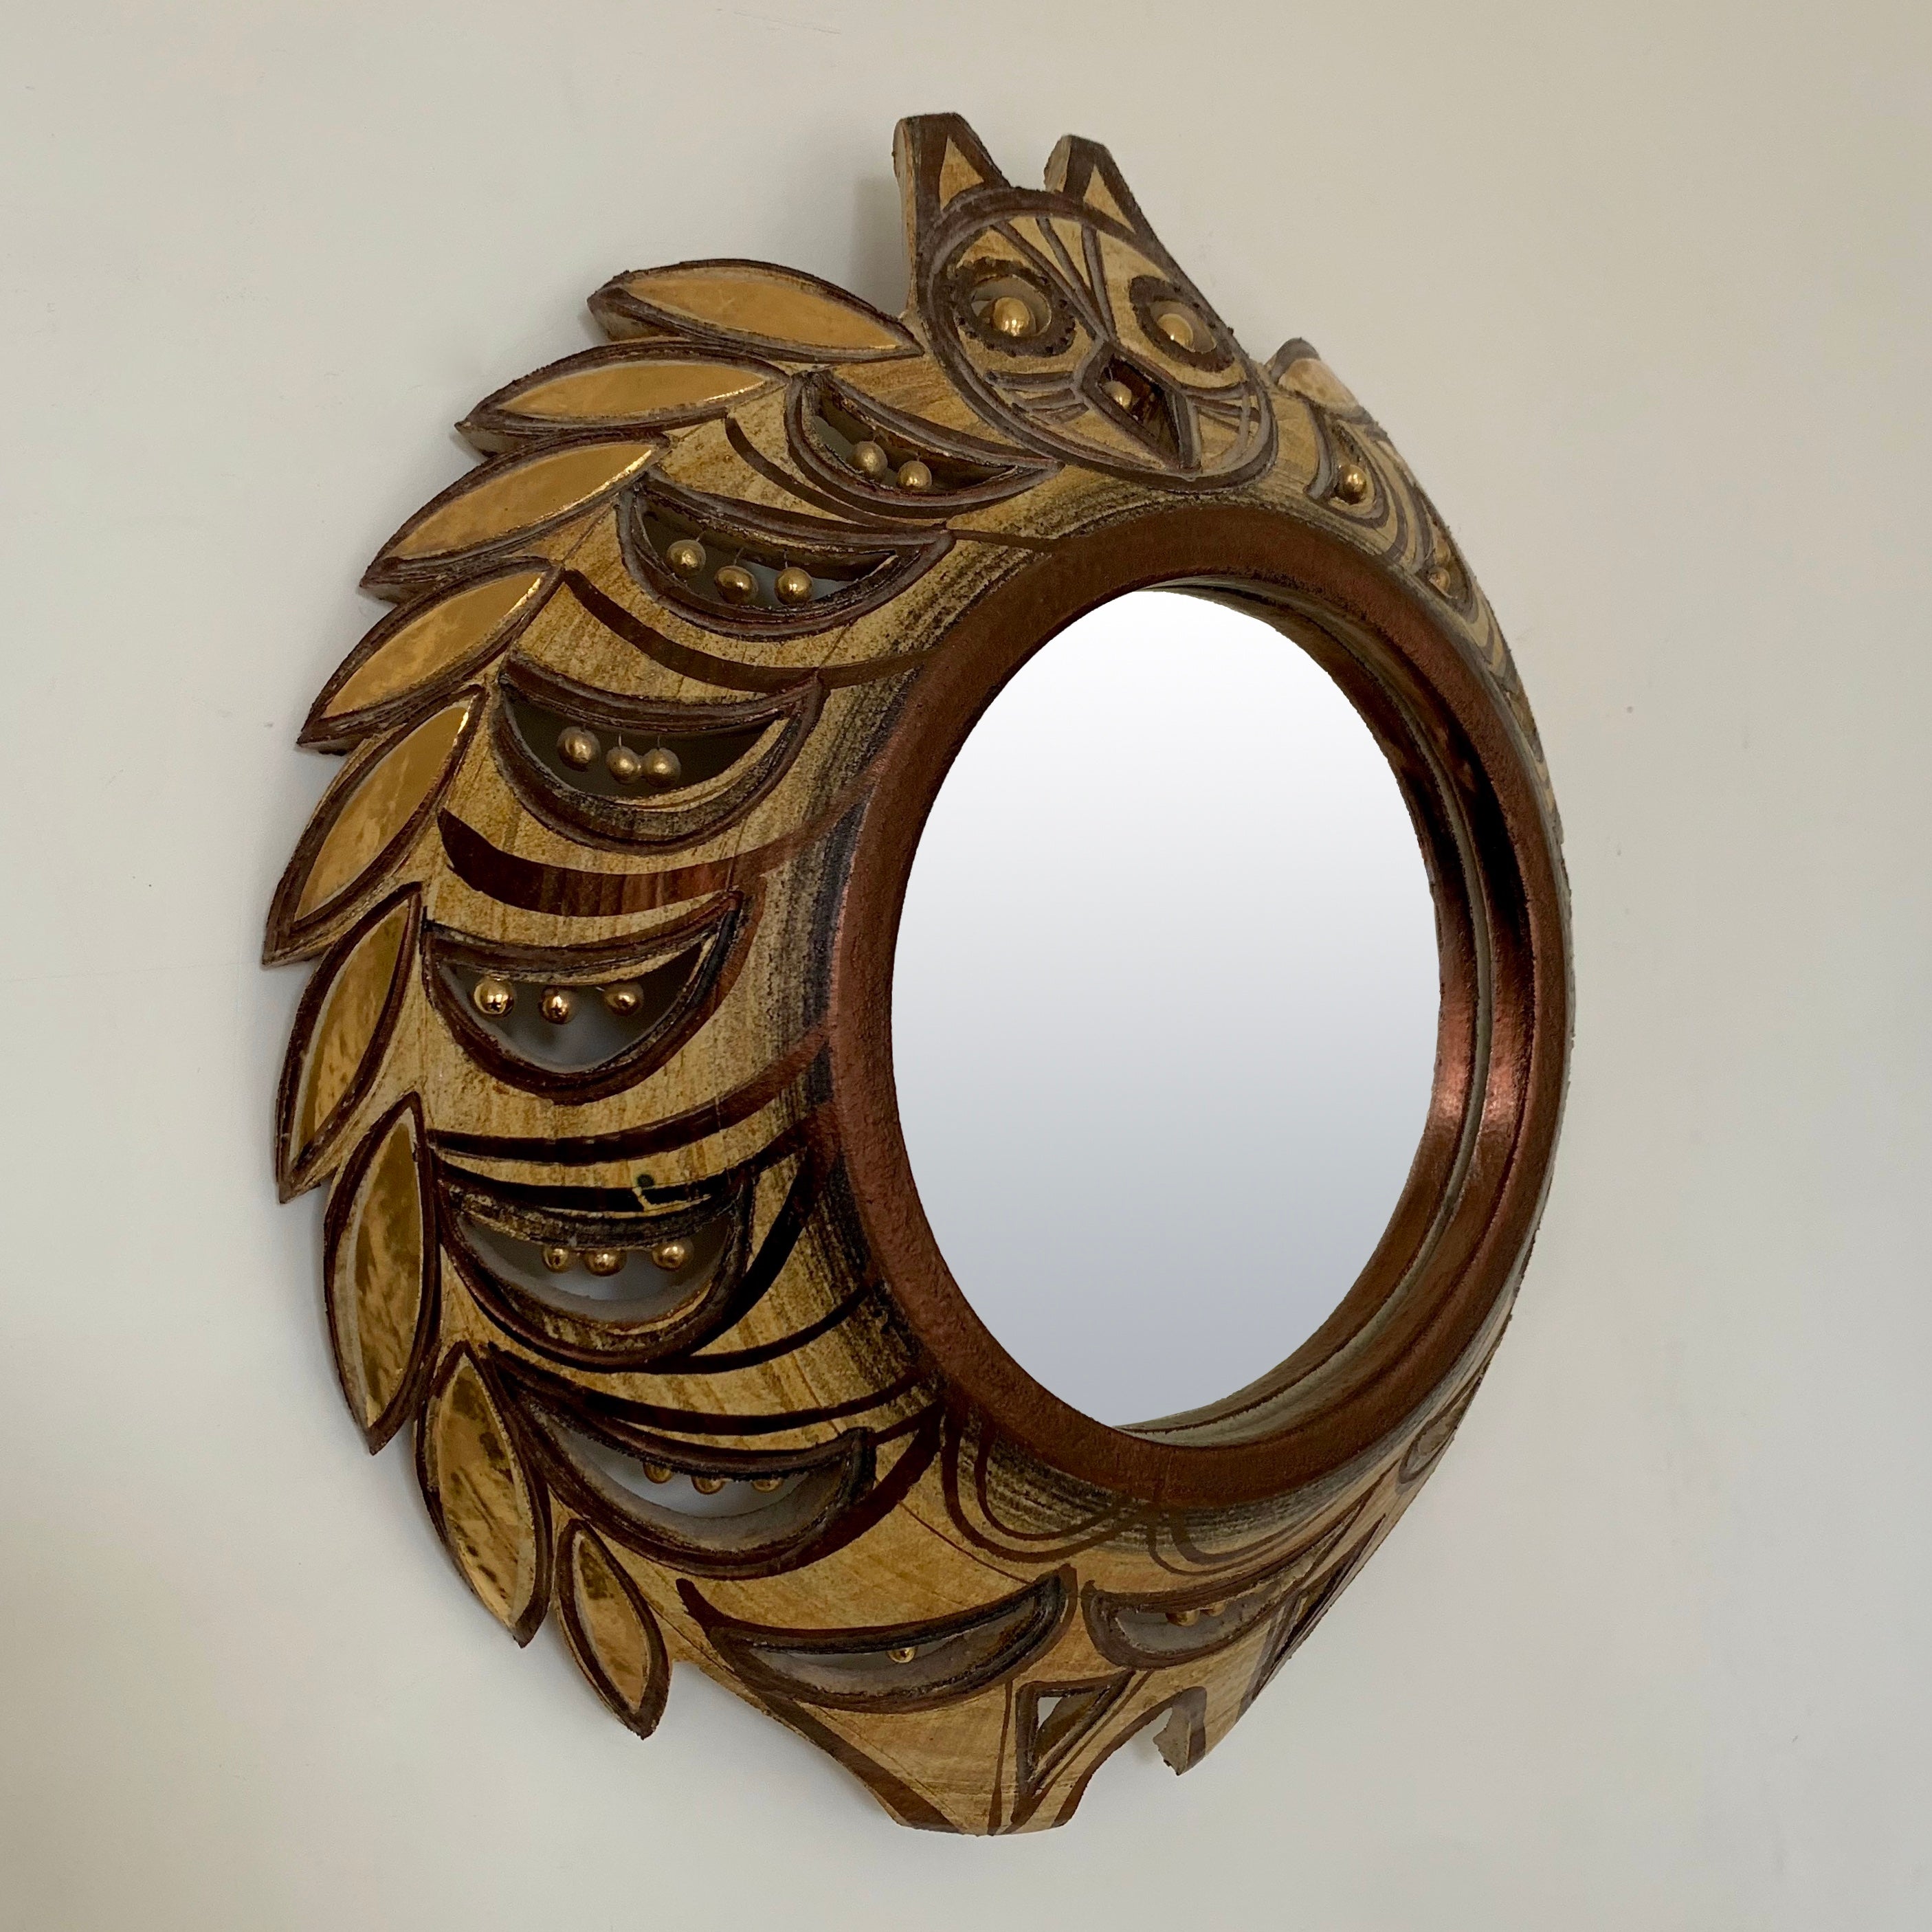 Rare and beautiful Georges Pelletier wall mirror, circa 1975, France.
Owl model with wide open wings, hand-painted and enameled ceramic. 
Brown, beige, gold and copper shades.
Dimensions: 49 cm H, 45 cm W, 13 cm D, diameter of the  central round